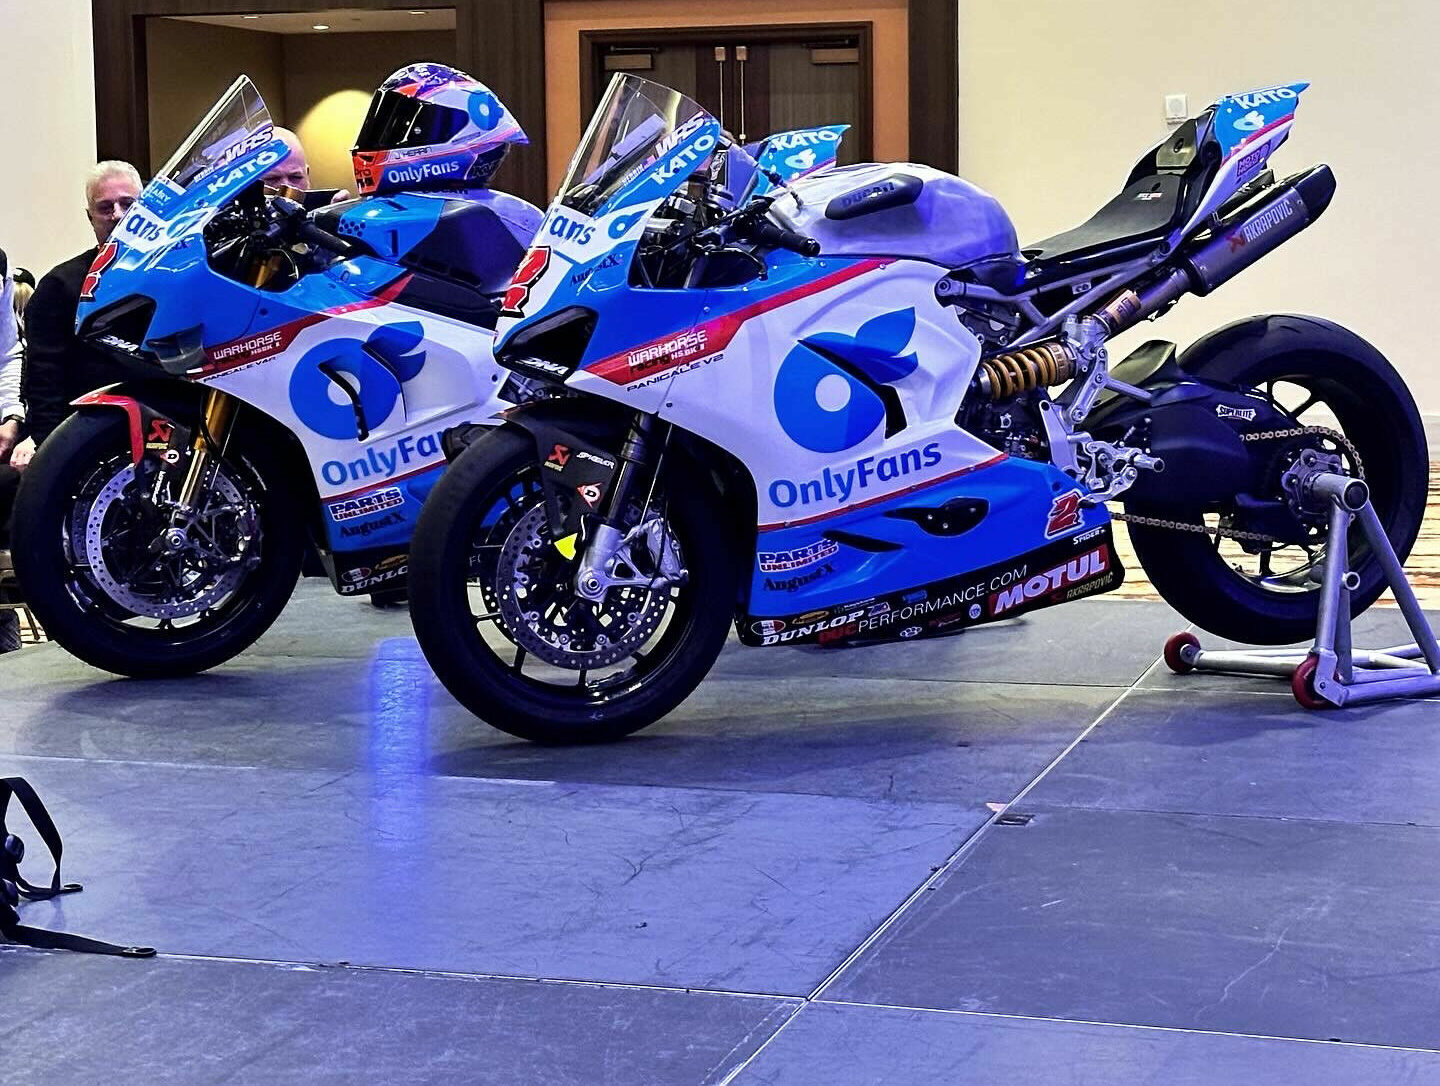 Josh Herrin's OnlyFans Warhorse Ducati Panigale V2 Supersport racebike for the Daytona 200 (right) and Panigale V4 R Superbike (left) at the launch event.